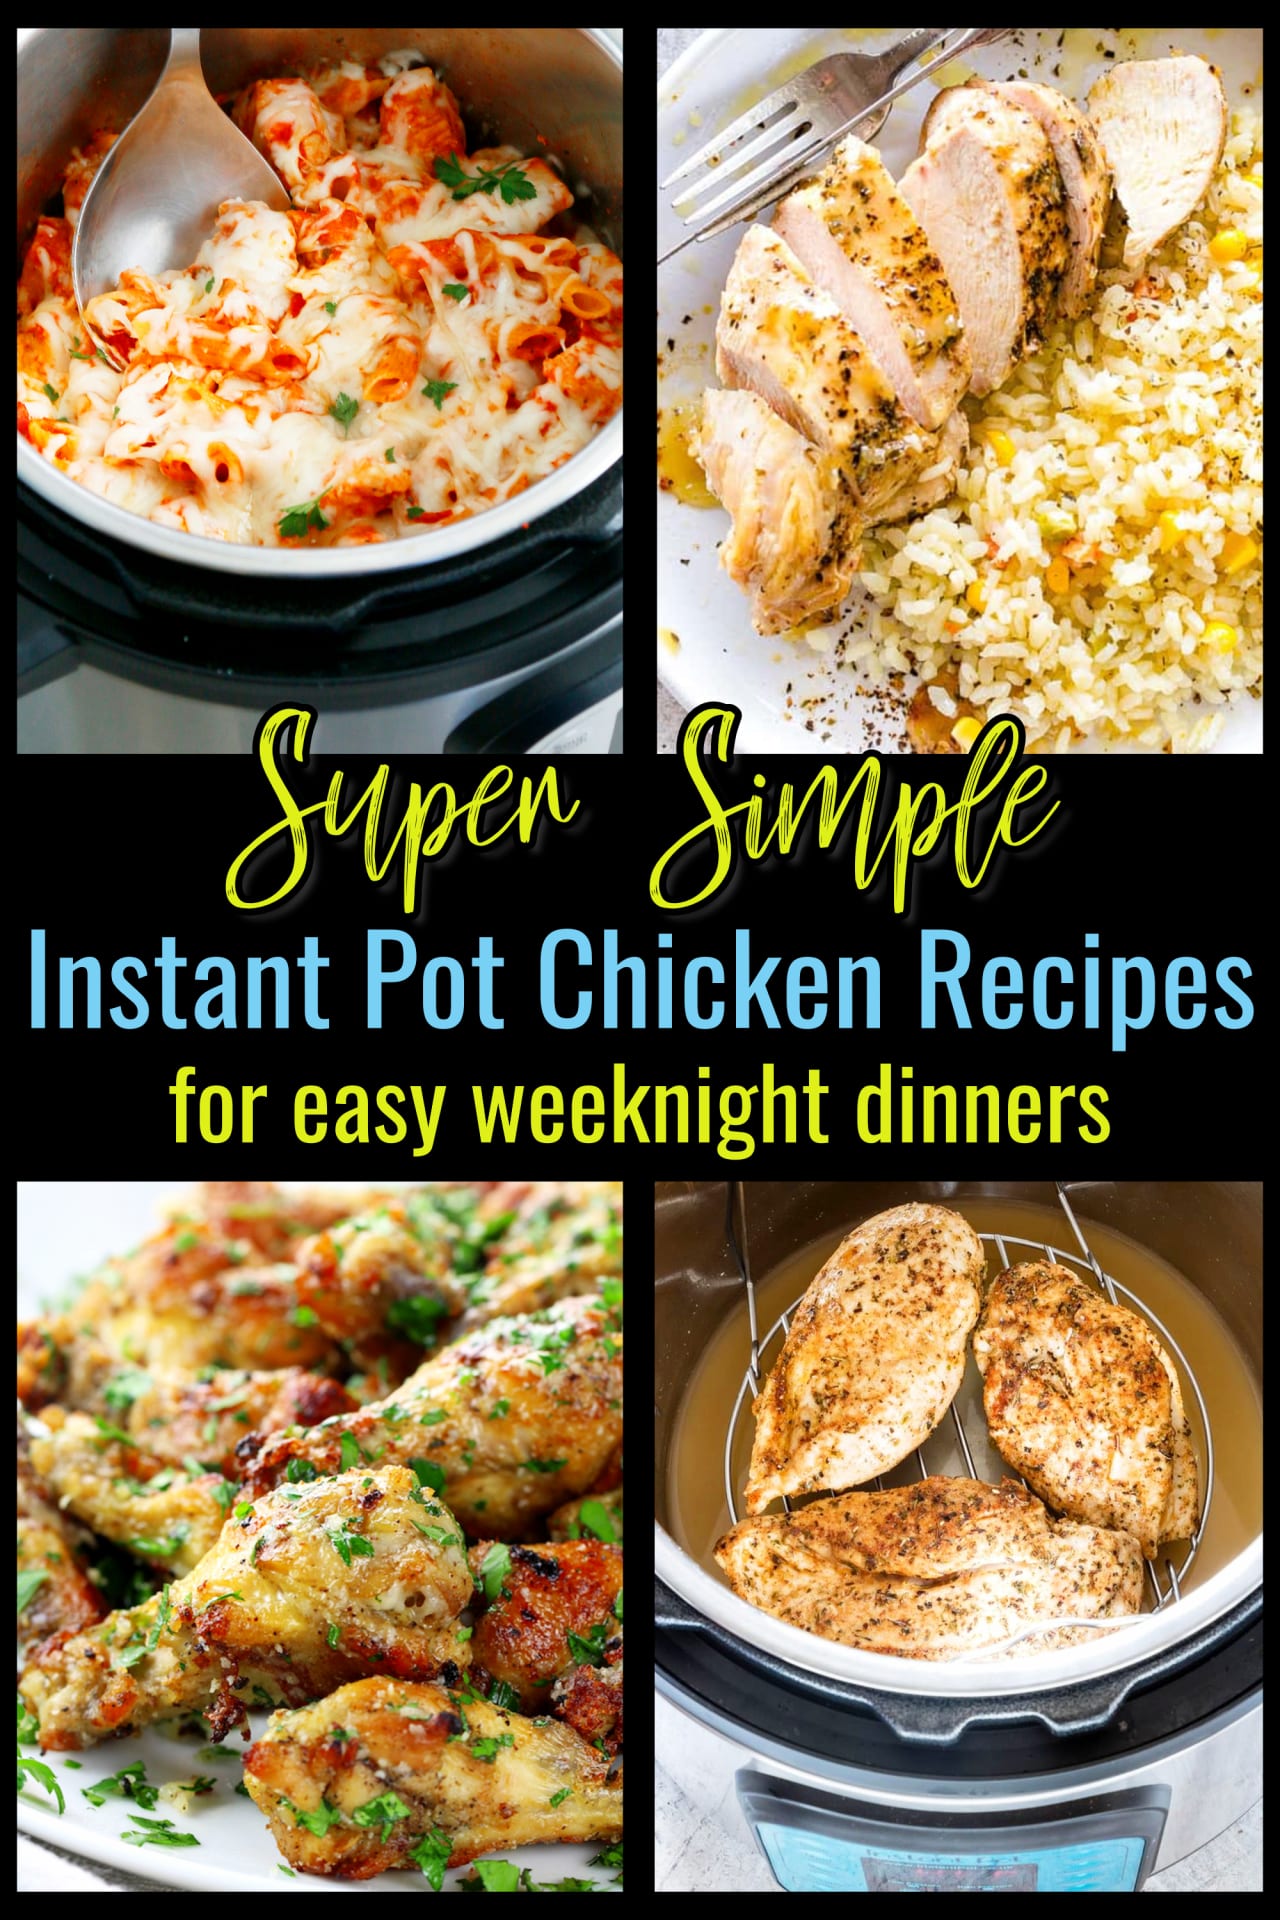 Instant Pot Chicken Recipes For Easy Weeknight Dinners - these super simple Instant Pot chicken recipes make for fast and easy meals when you need recipes for dinner tonight.  Easy one pot pressure cooker meals made with fresh or frozen chicken - perfect instant pot chicken recipes for beginners